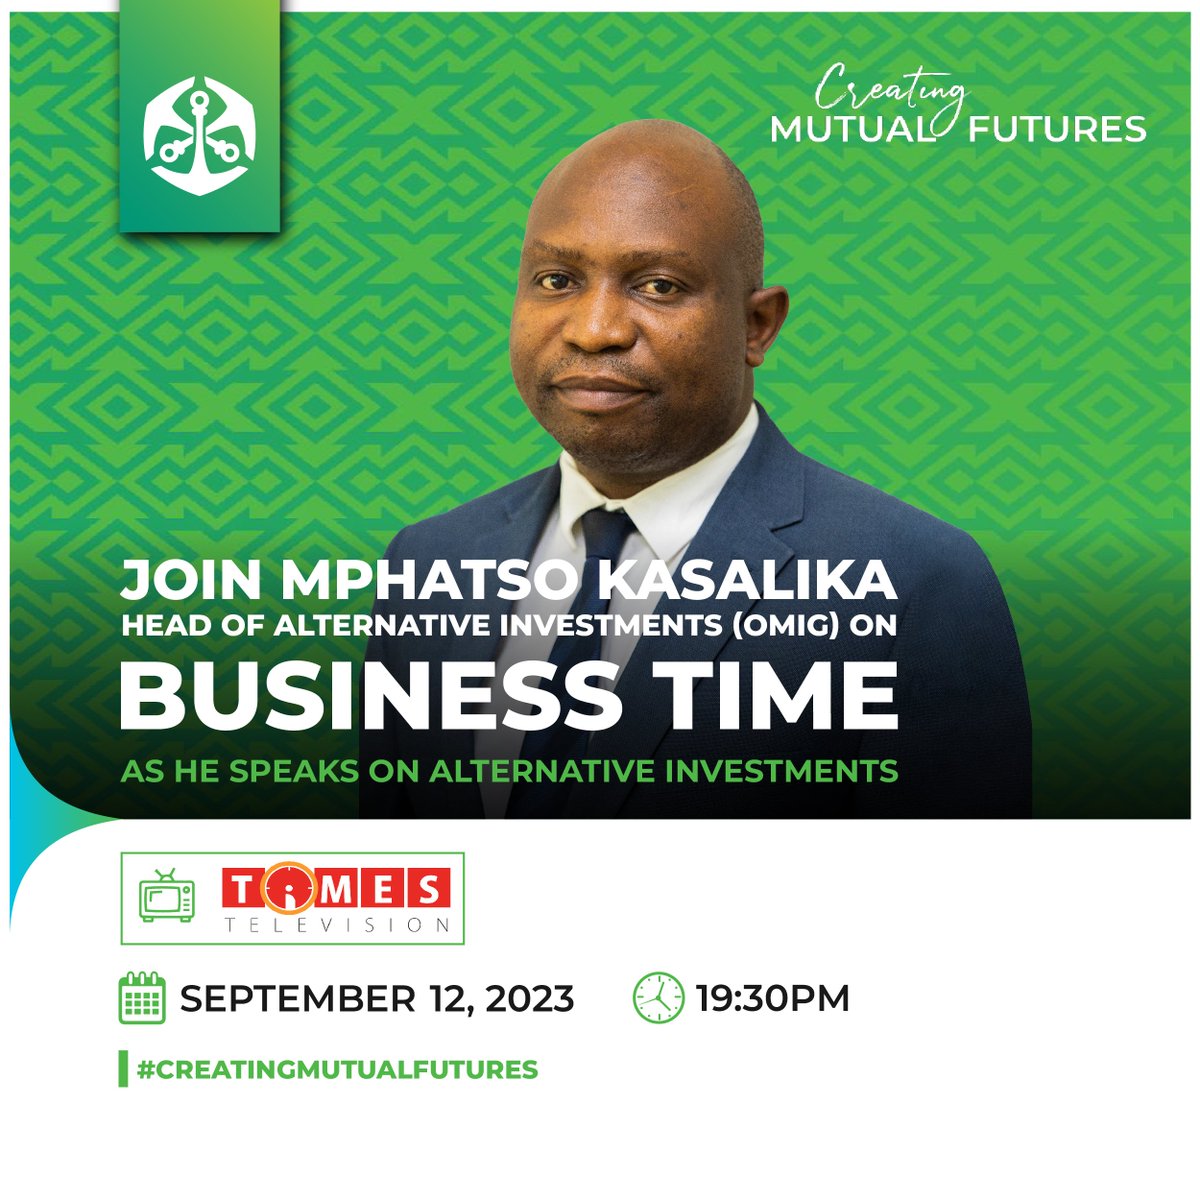 Catch Old Mutual Investment Group’s Head of Alternative Investments, Mphatso Kasalika, in Business Time program on Times Television this evening at 07:30pm as he talks on Alternative Investments.

#ResponsibleInvestment
#CreatingMutualFutures
#OldMutual